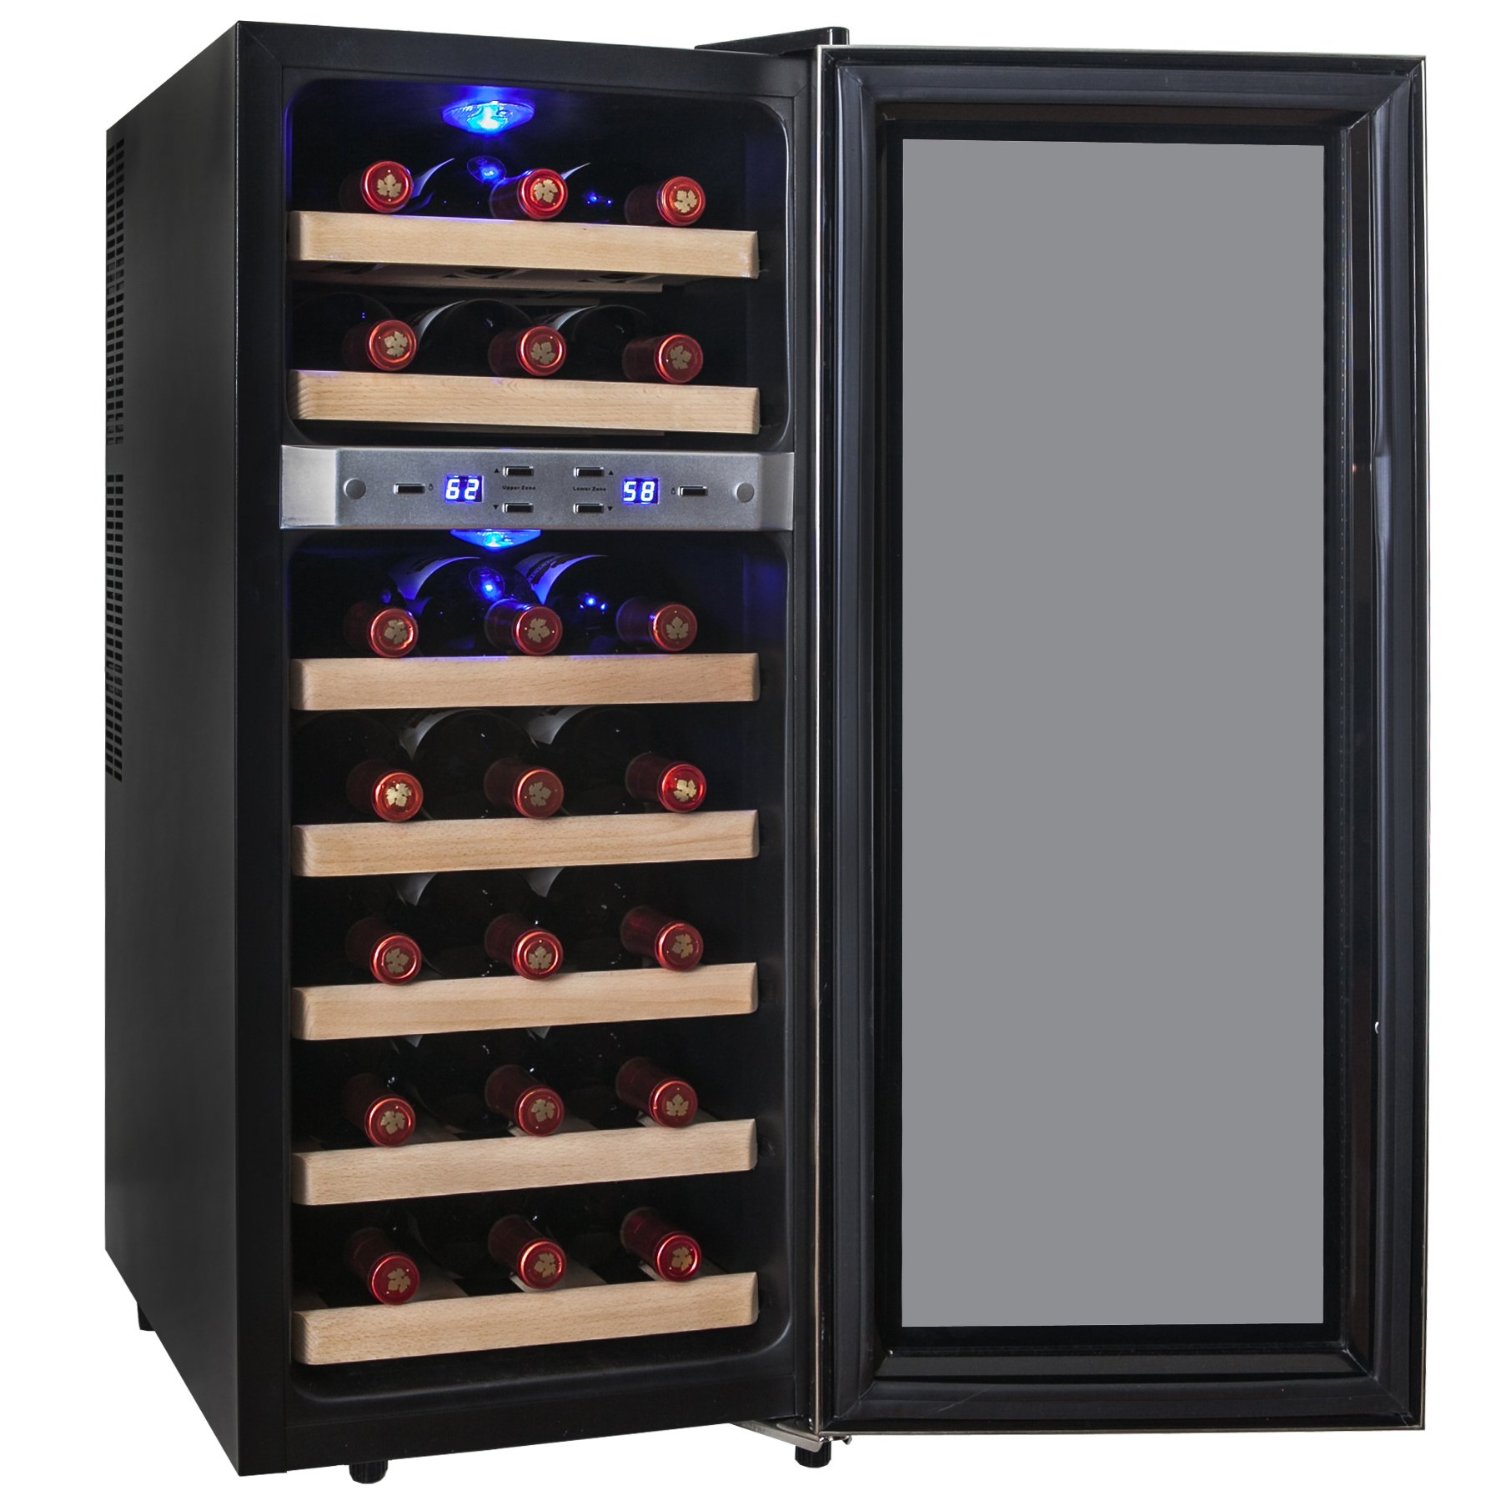 Differences Between Wine Cooler and Home Refrigerator